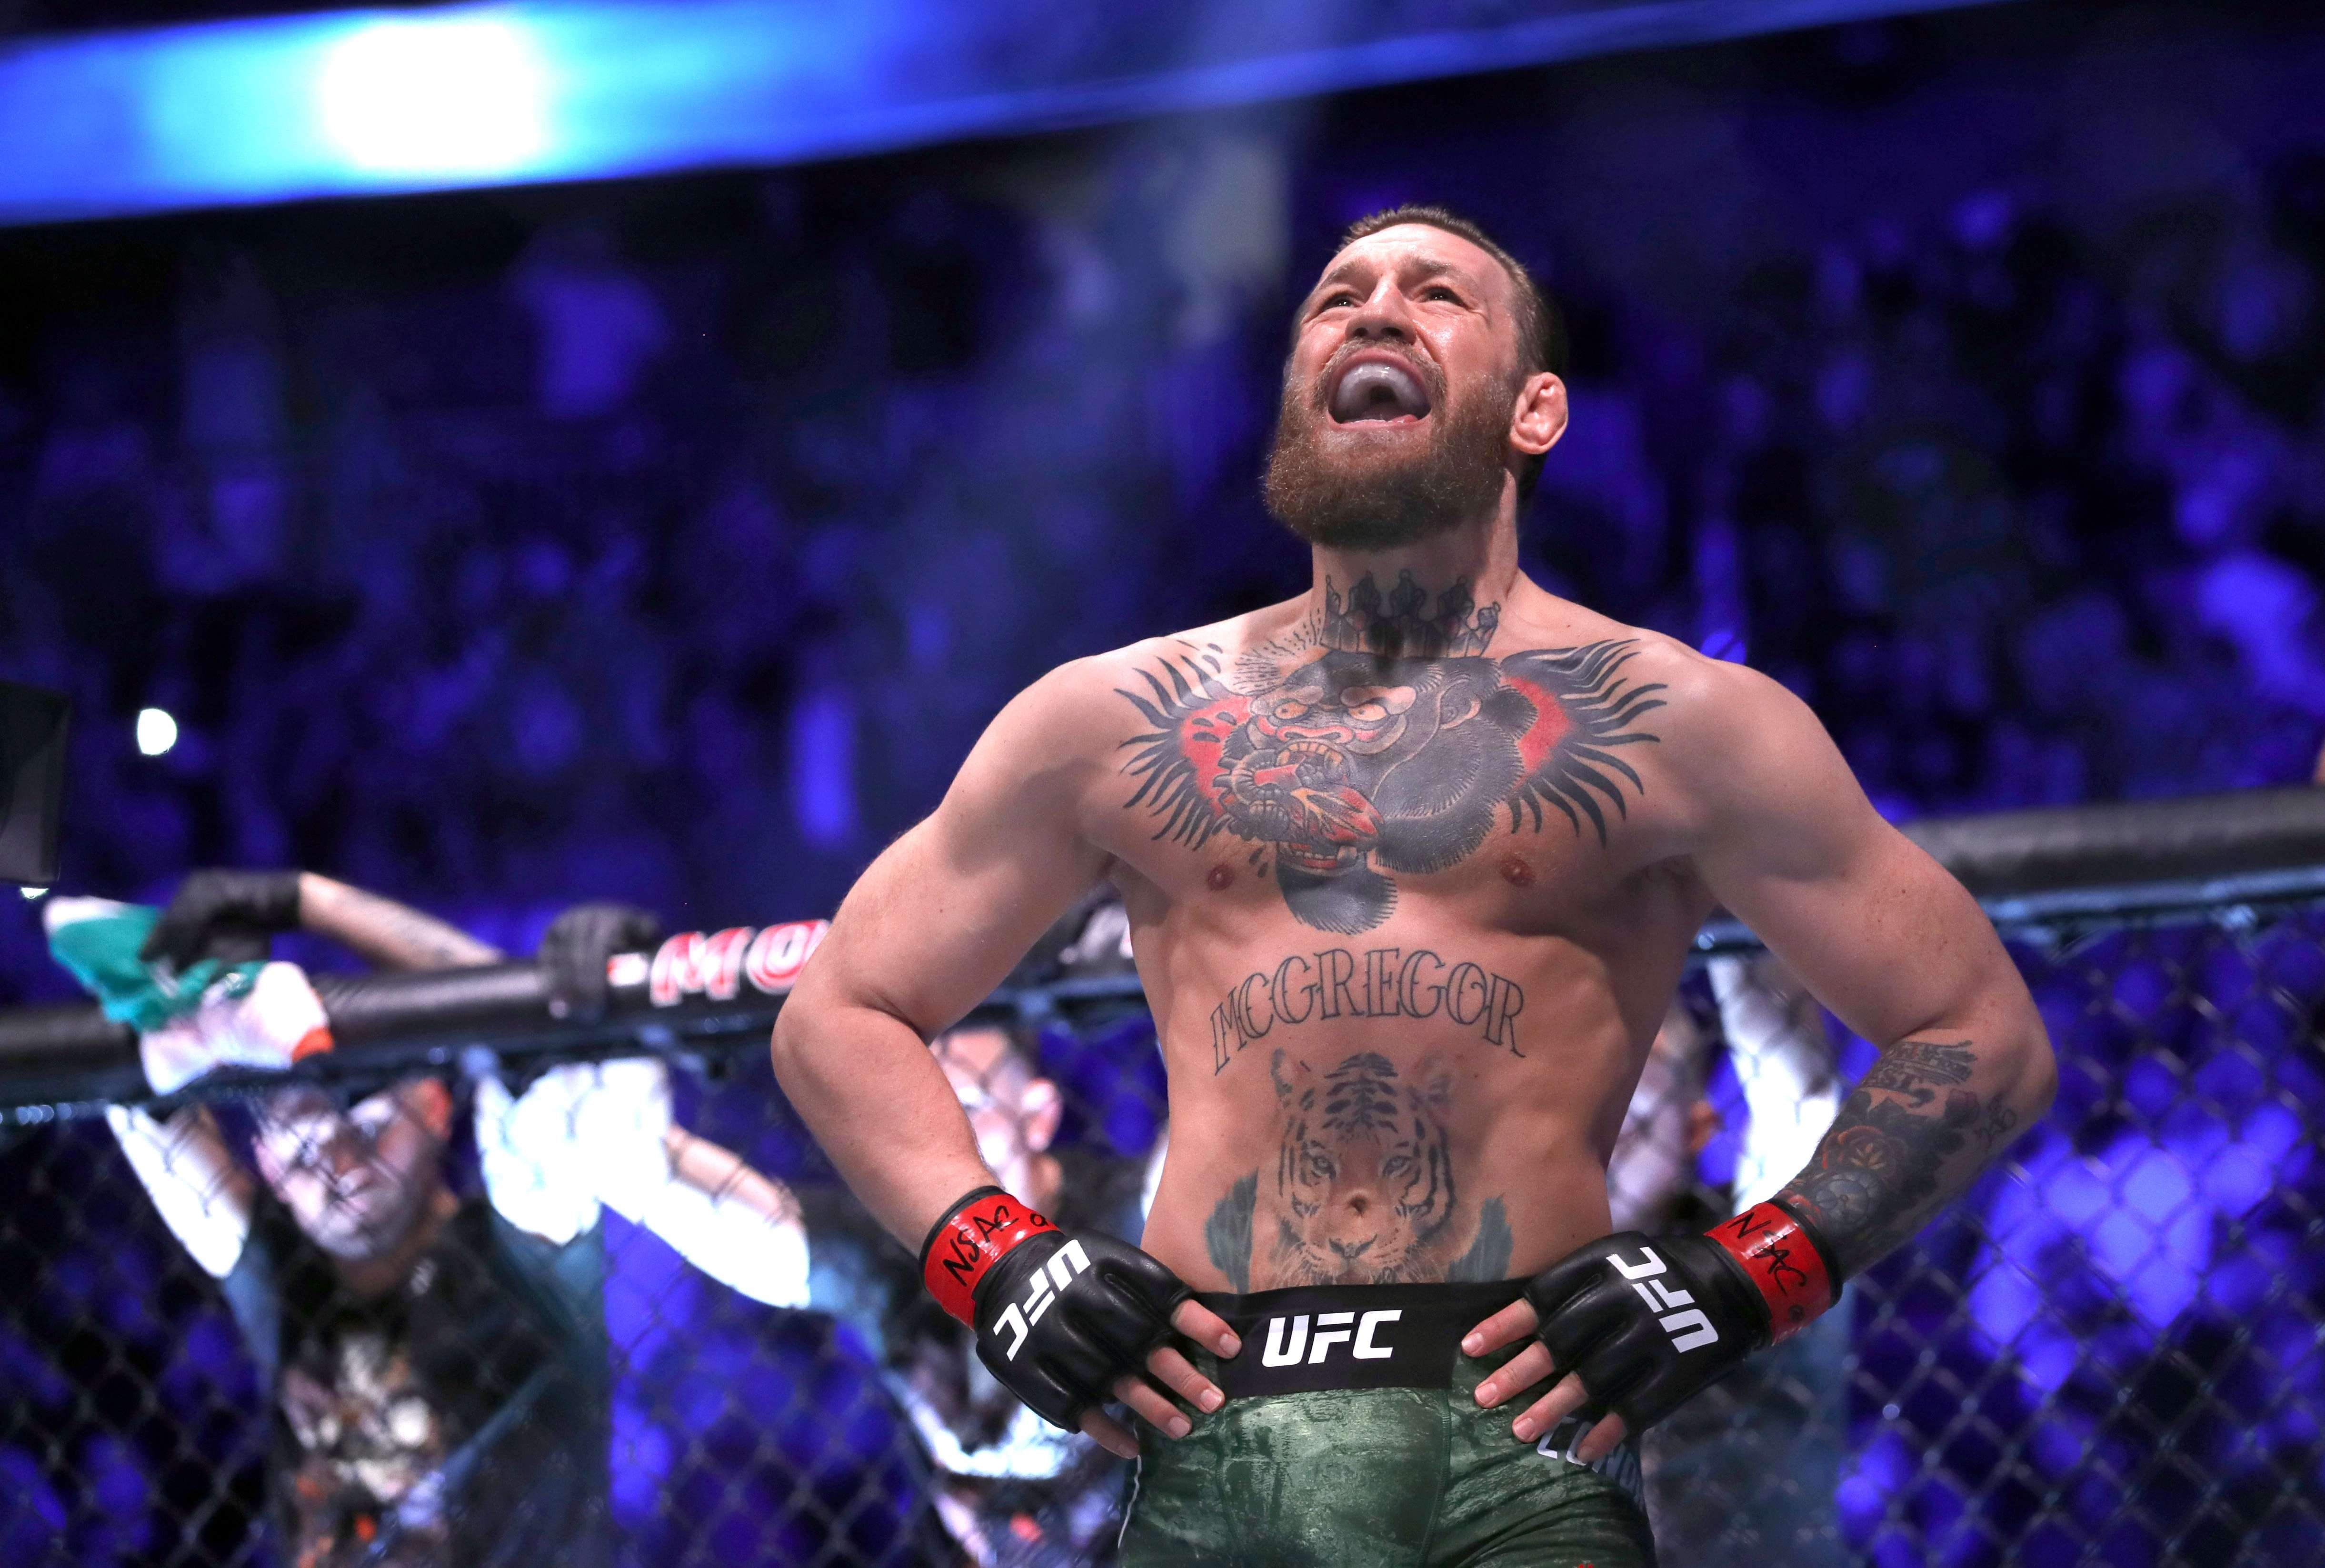 Conor McGregor waits for the start of his welterweight bout against Donald Cerrone at UFC 246. Photo: AFP